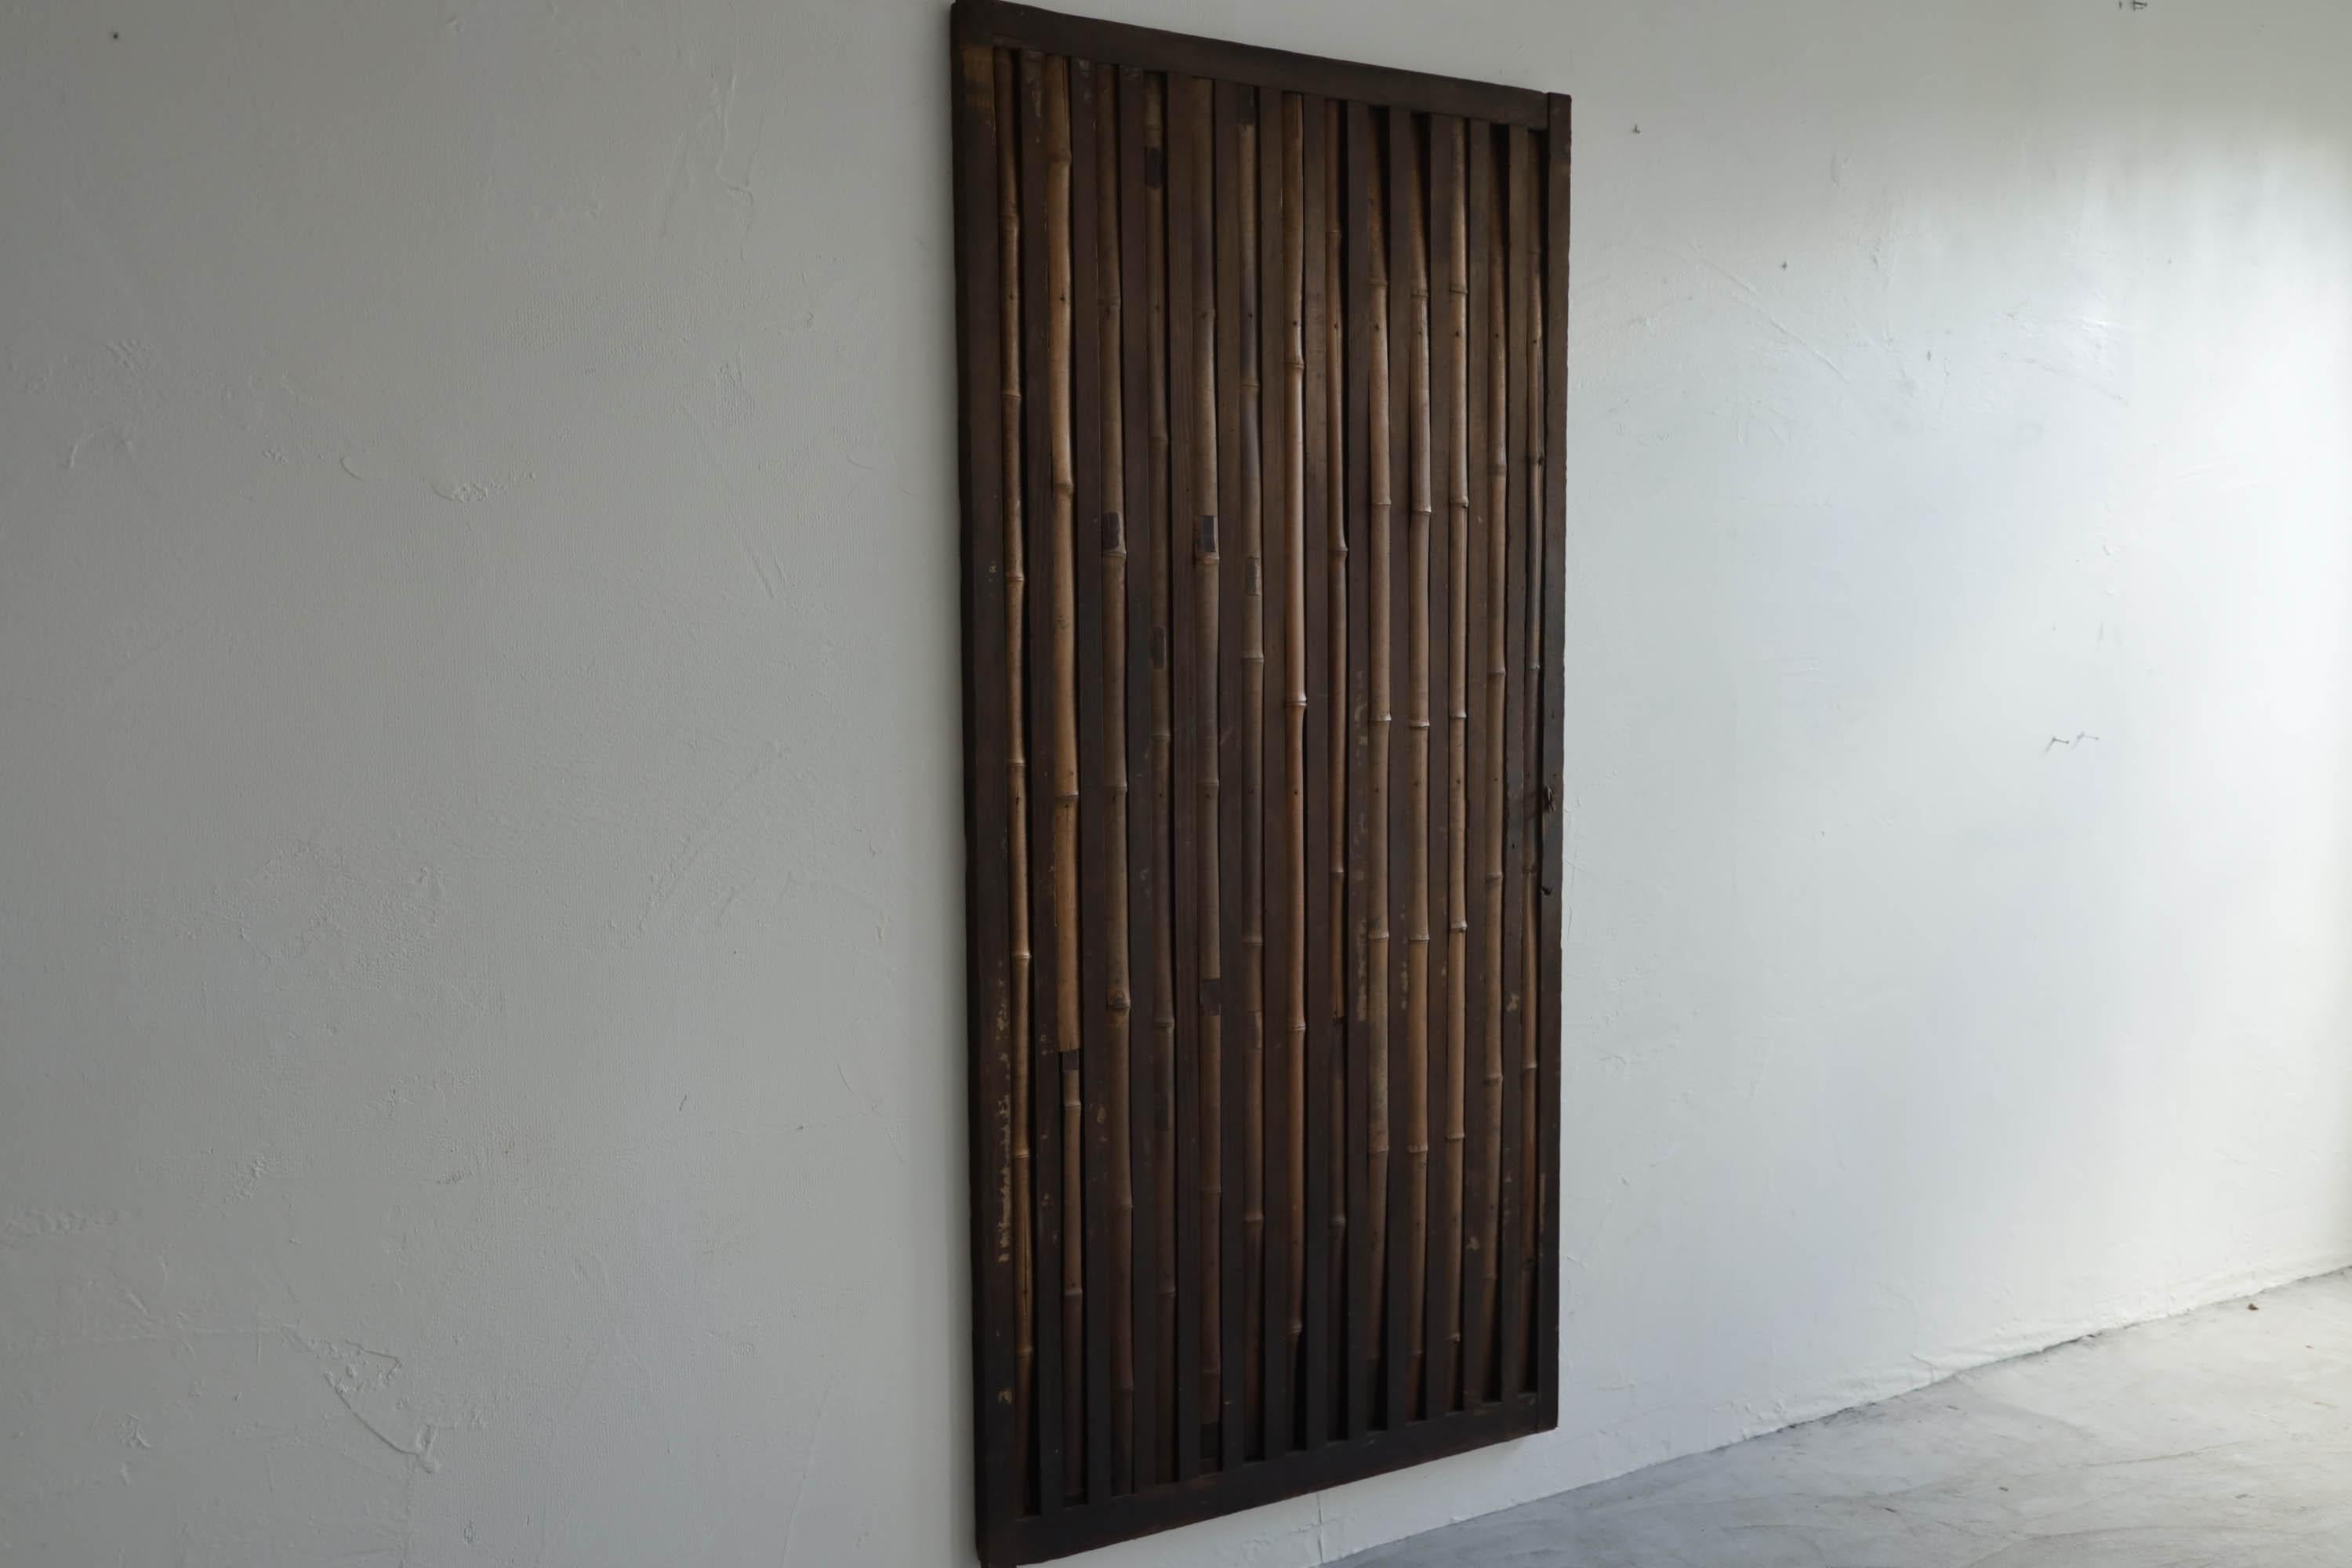 This is a very old Japanese sliding door.
It is a simple design that conveys the charm of the material.
You can feel the world of wabi and sabi.

It dates from the Meiji period (1860s-1900s).
It is constructed primarily of cedar and